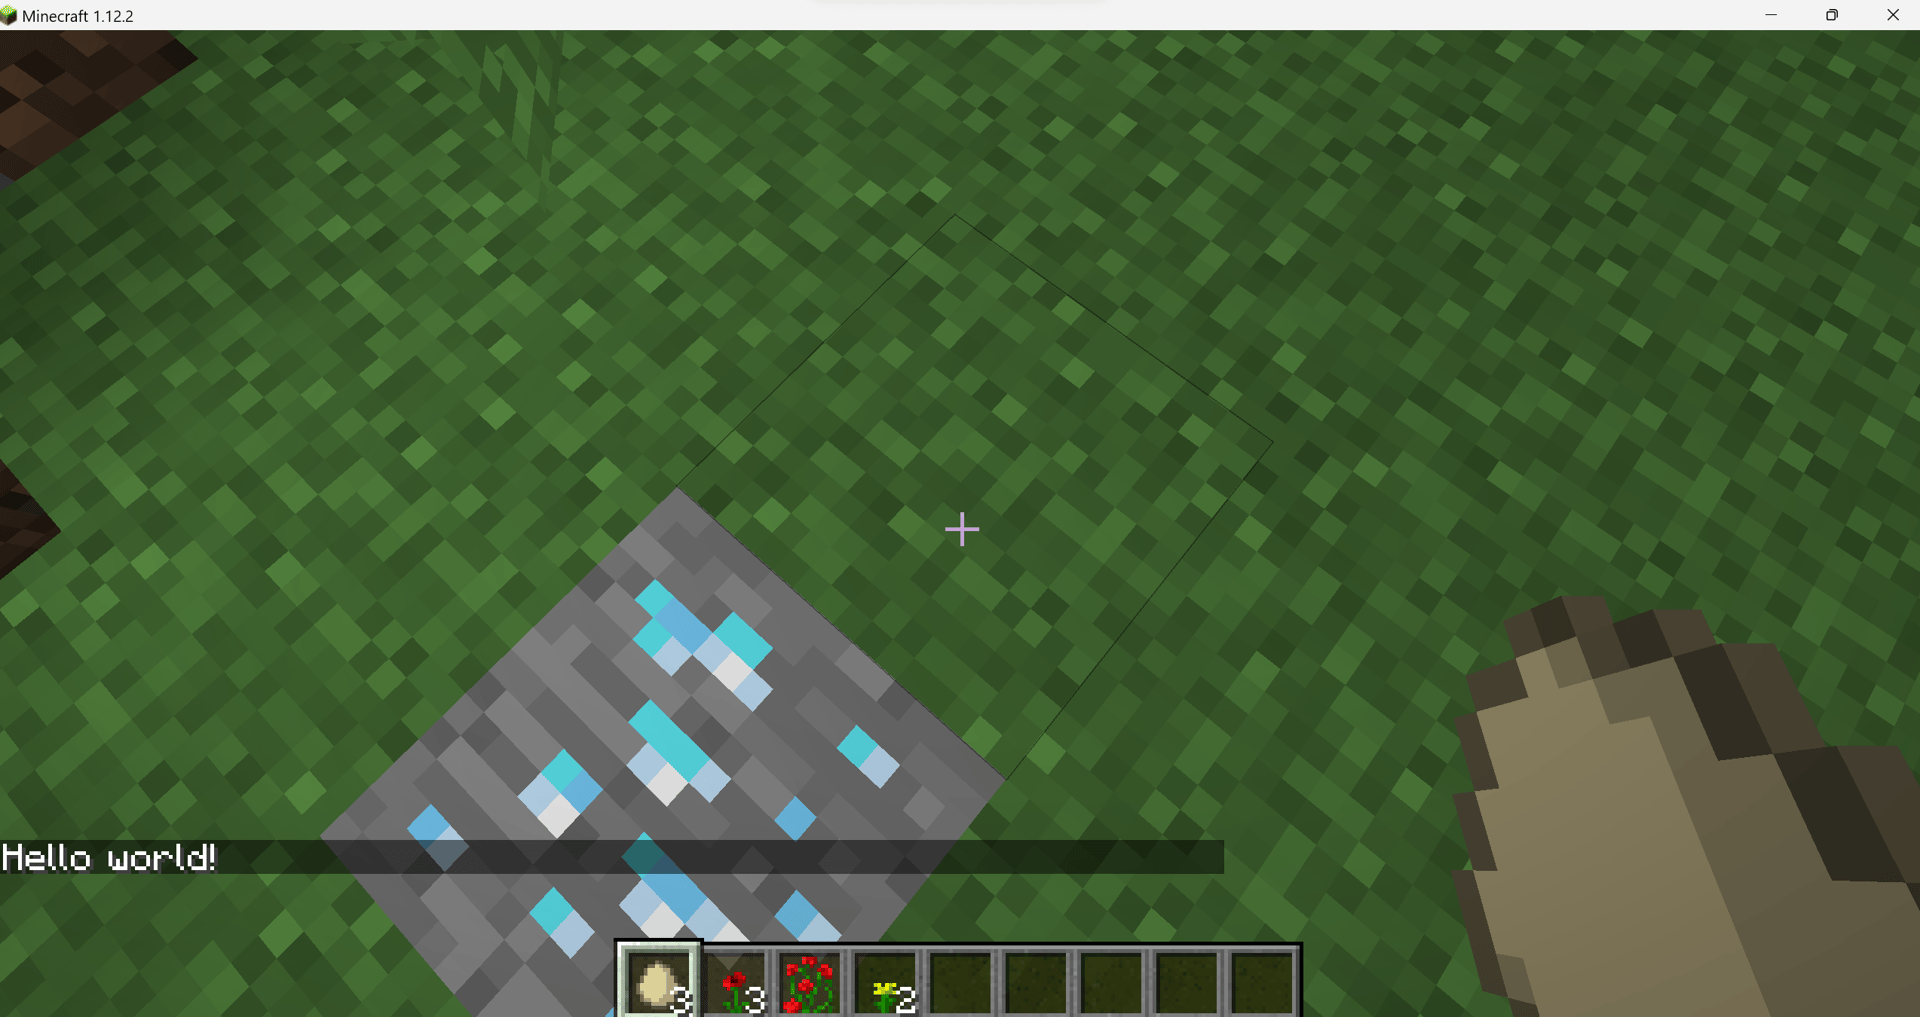 the `/py helloworld command returns "Hello world!" to the console and spawns a diamond ore block under the player character's feet